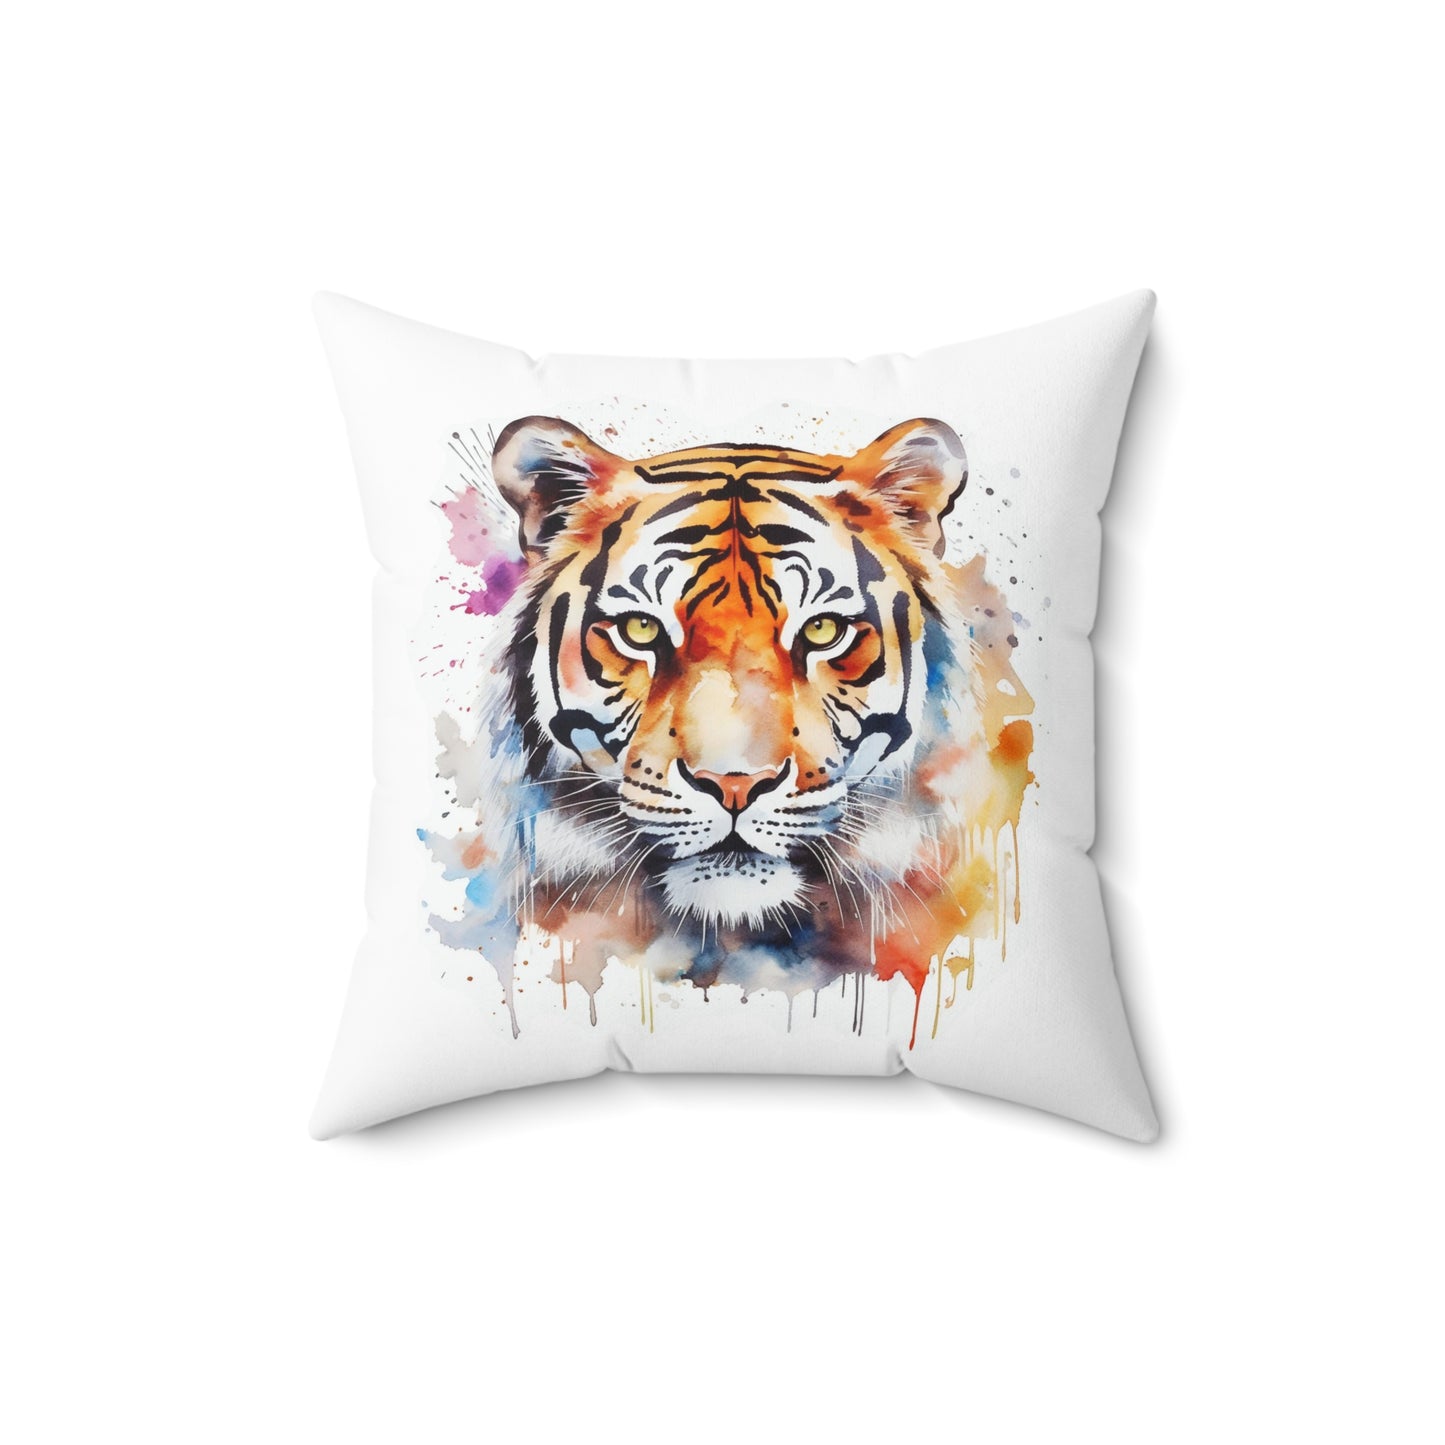 Tiger Throw Pillow, Watercolor Tiger Decorative Pillow, Square Animal Cushion, Double Sided Accent Pillow, Concealed Zipper